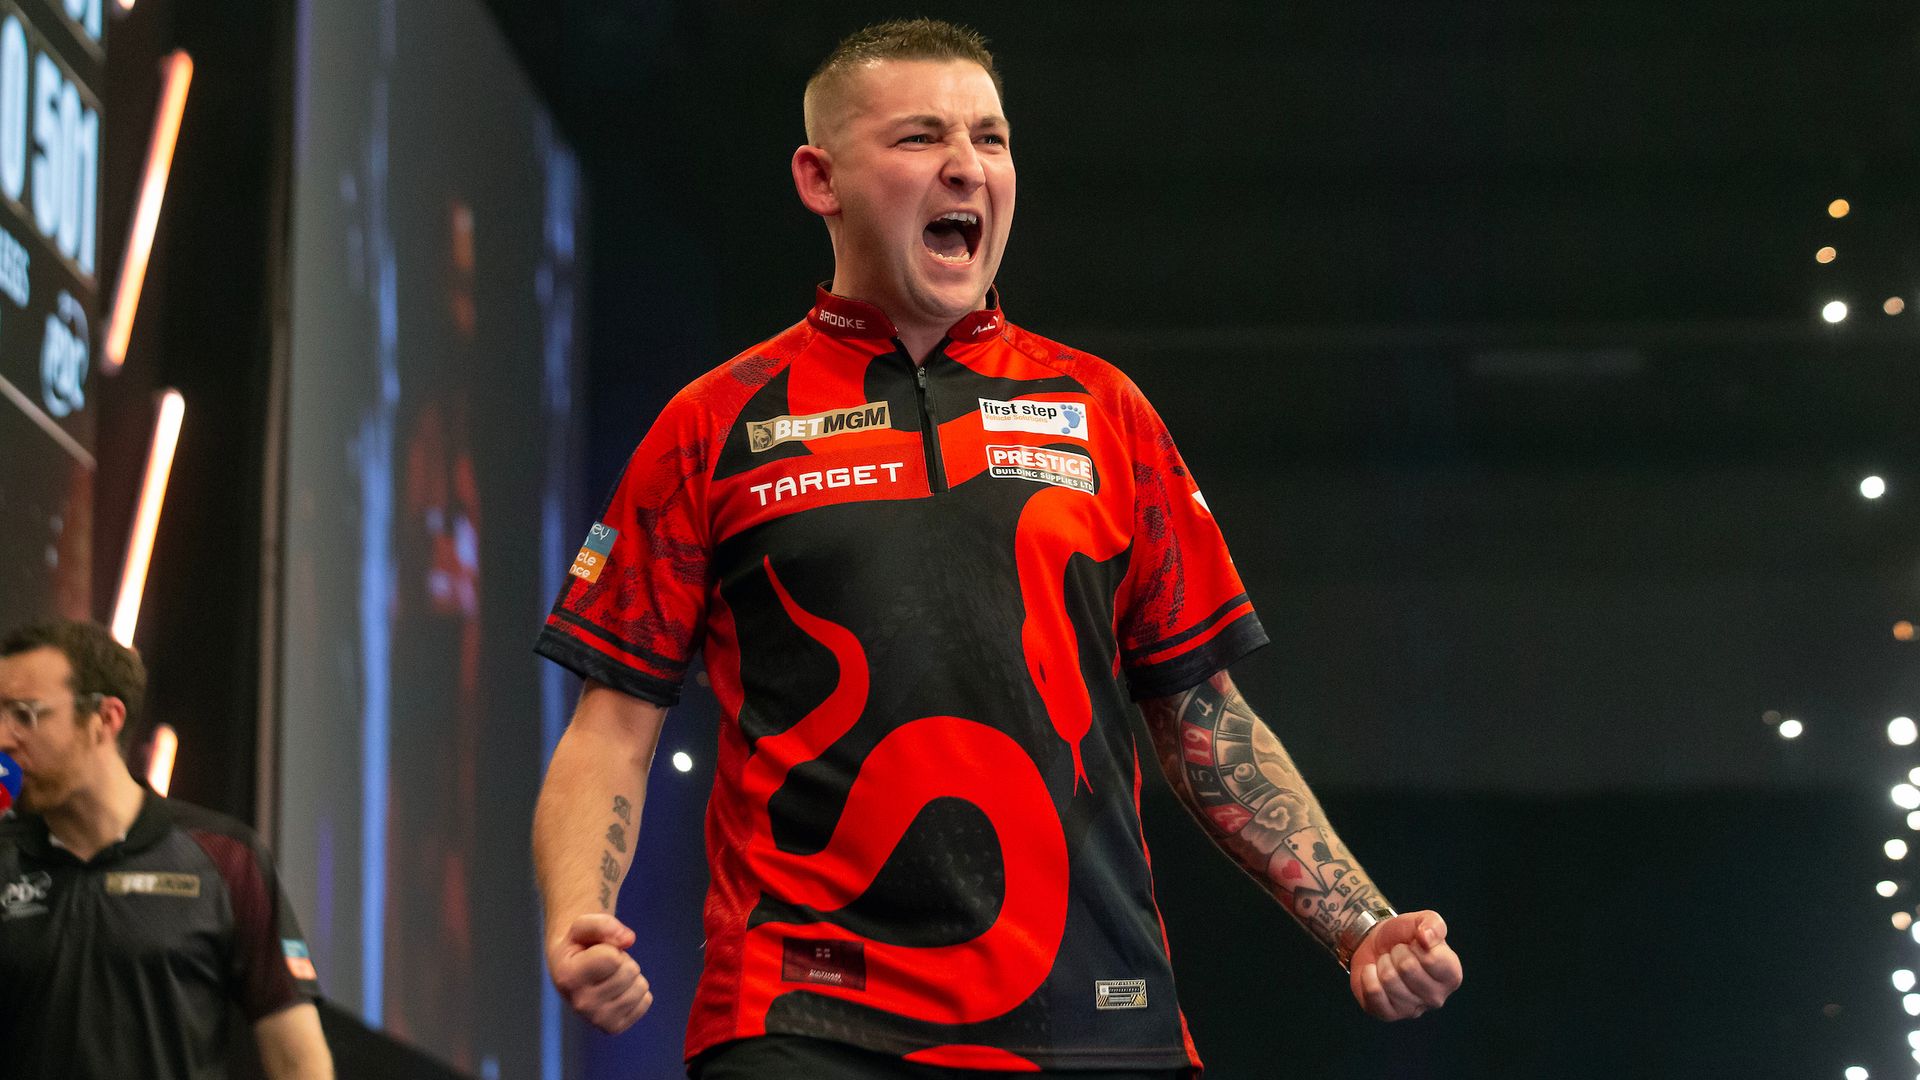 Aspinall: From debt to Premier League darts star